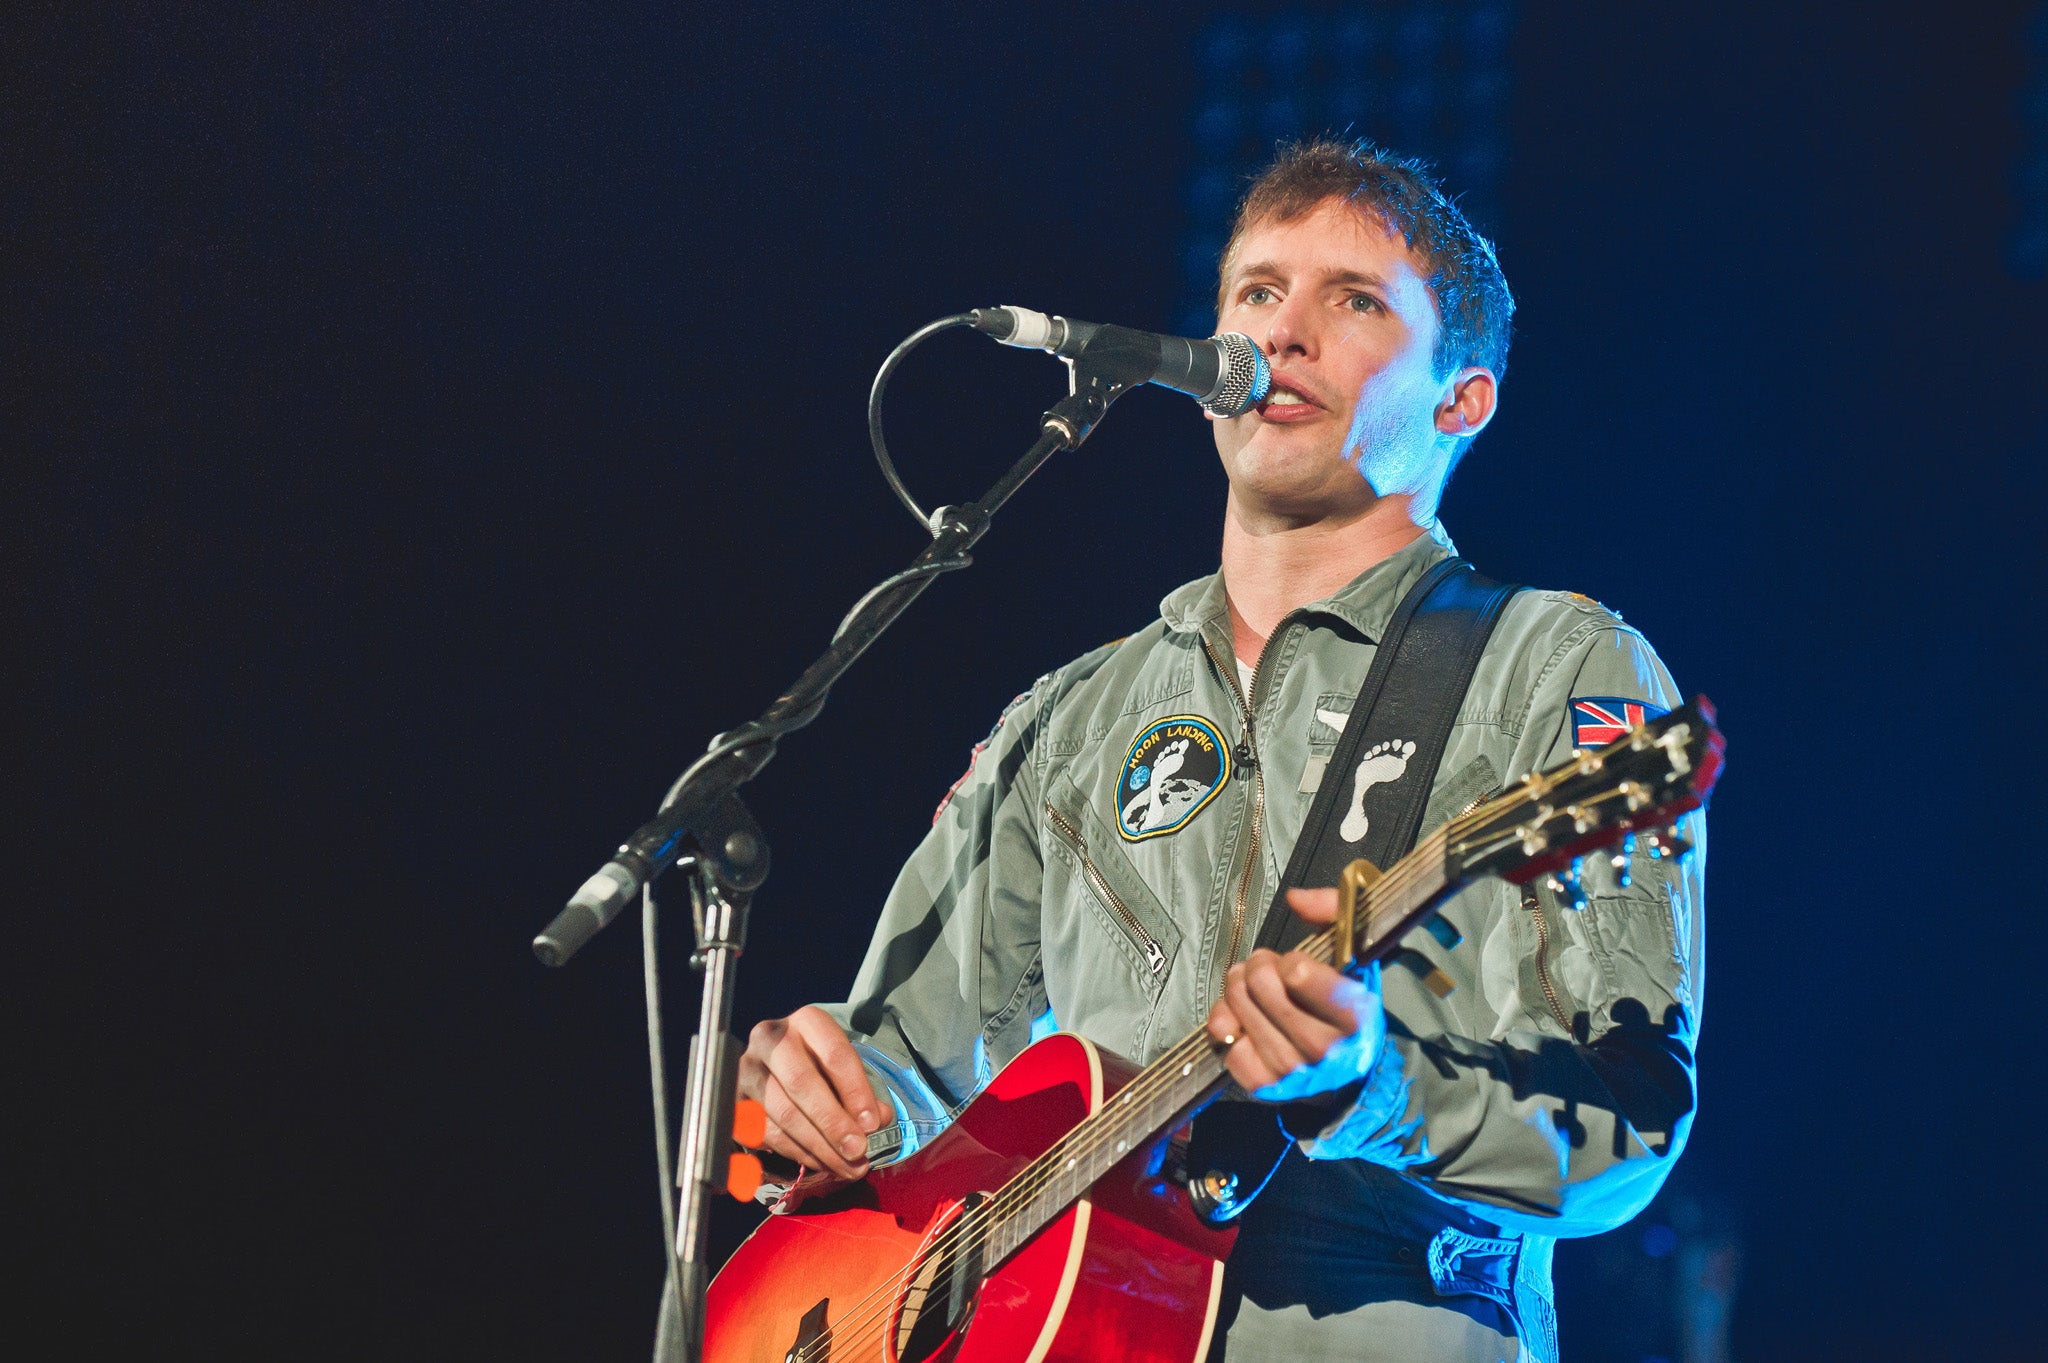 The spat between Labour MP Chris Bryant and James Blunt drew attention to the uncomfortable truth that the creative industries are now so choked with privilege that diversity and radicalism are getting lost